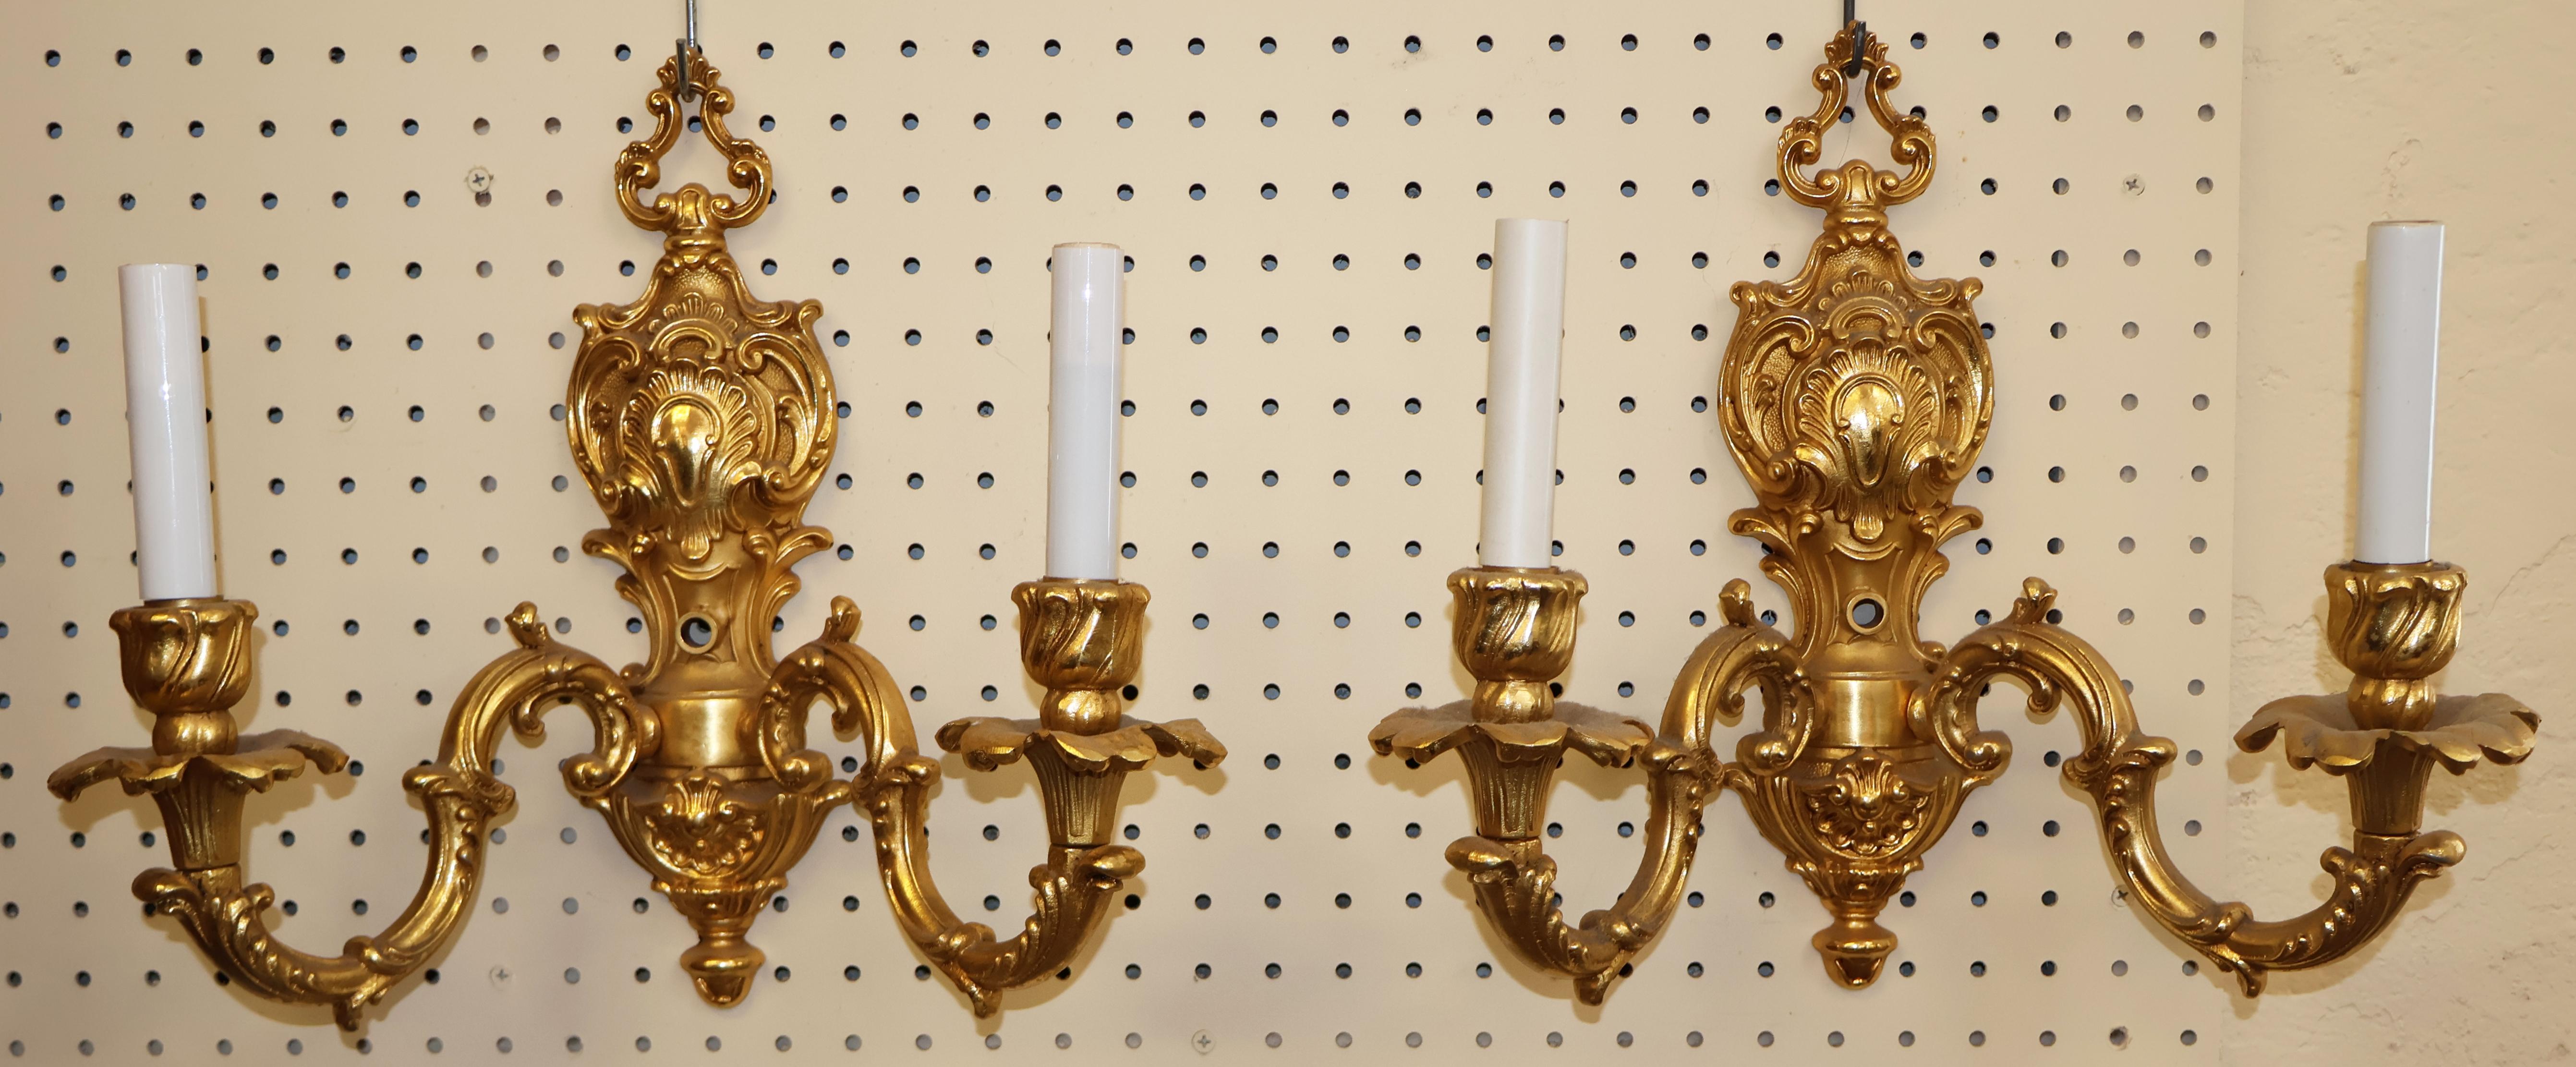 ​Stunning Pair of Gold Dore Bronze Two Light Sconces By FBAI

Dimensions : 13